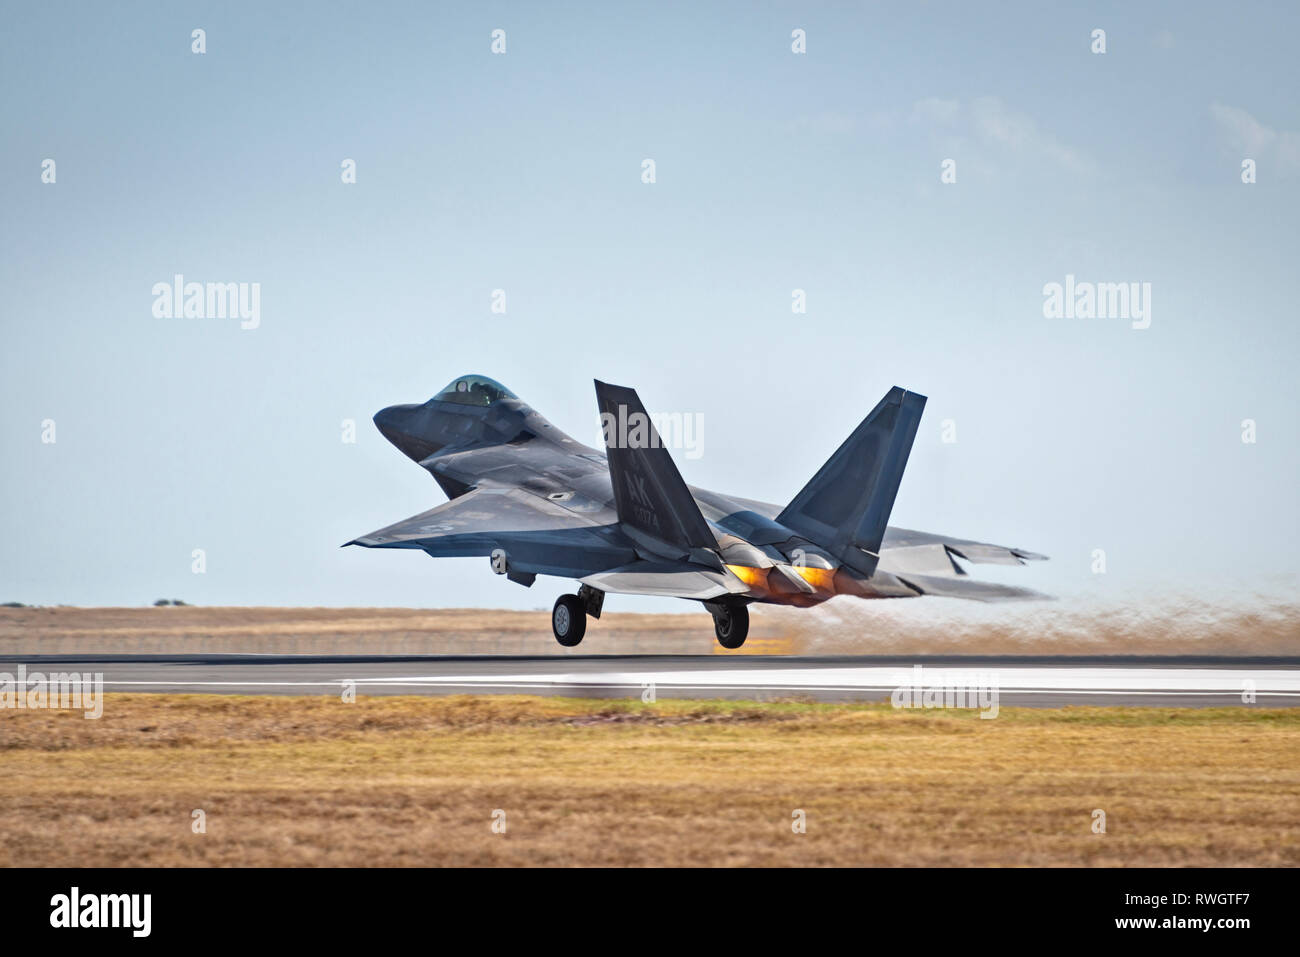 US Air Force F-22 Raptor in flight,taking off with flames from engines, landing gear visible Stock Photo